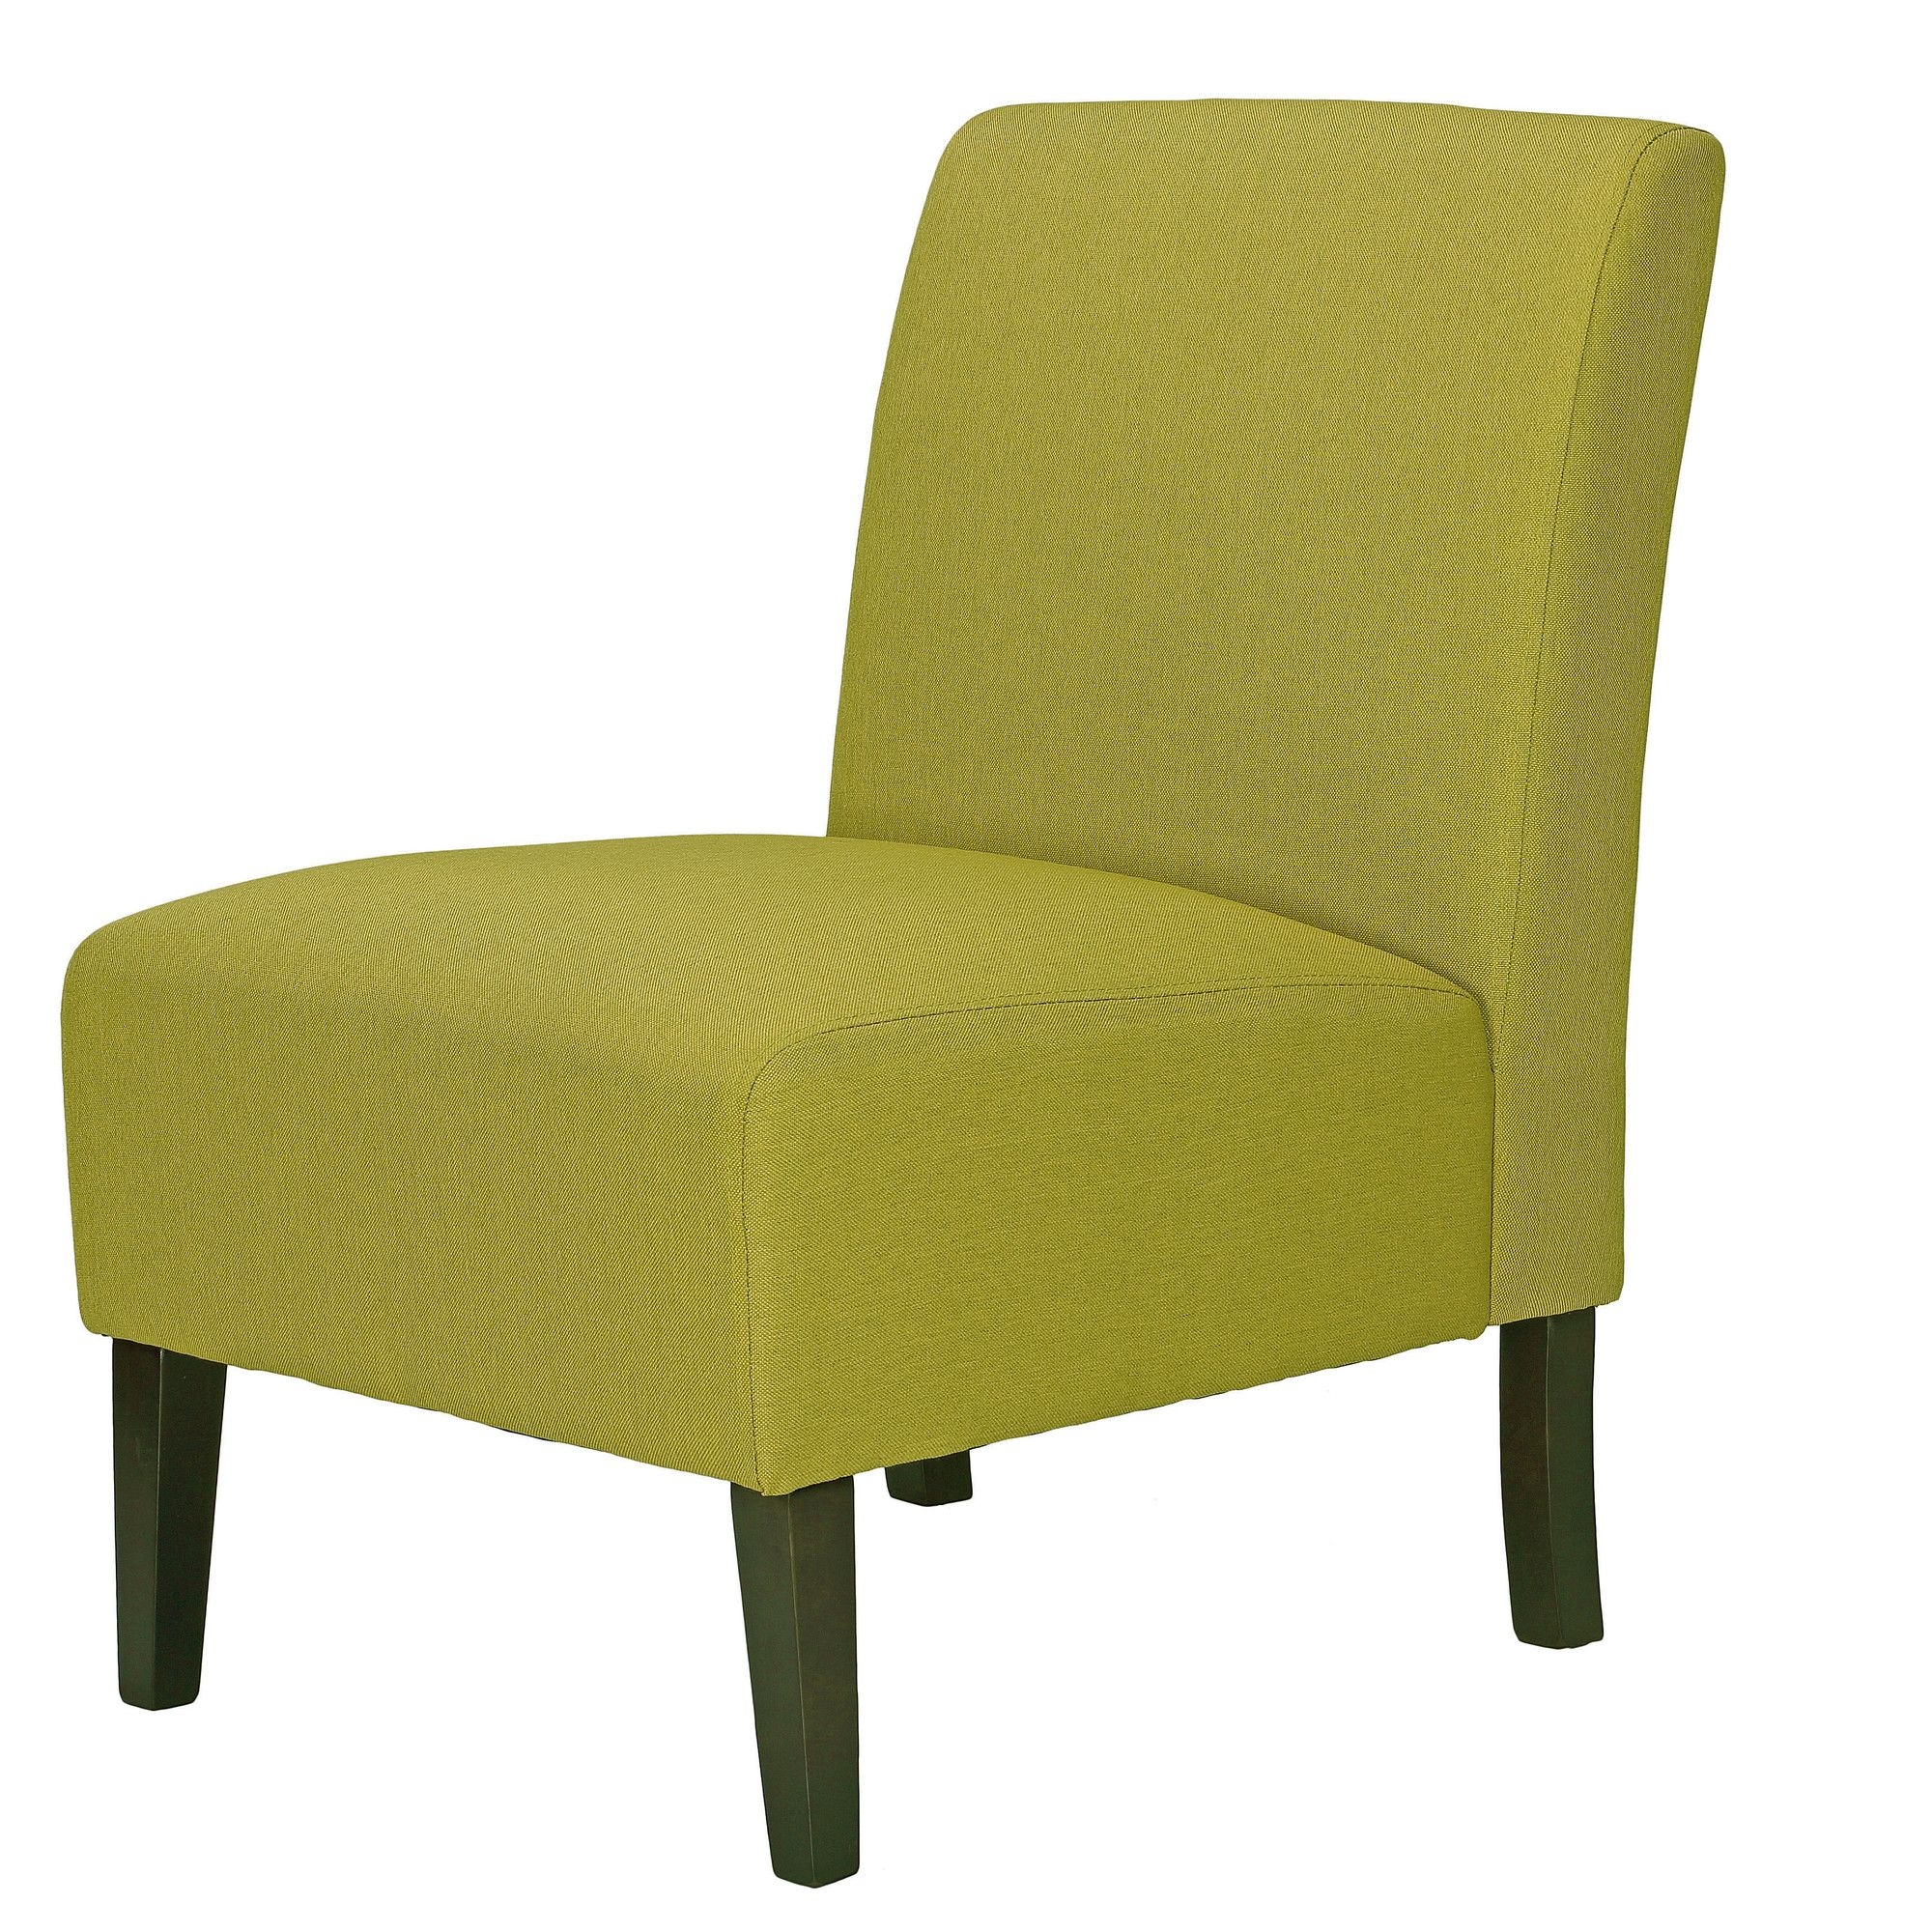 Lime Green Accent Chair Ideas On Foter